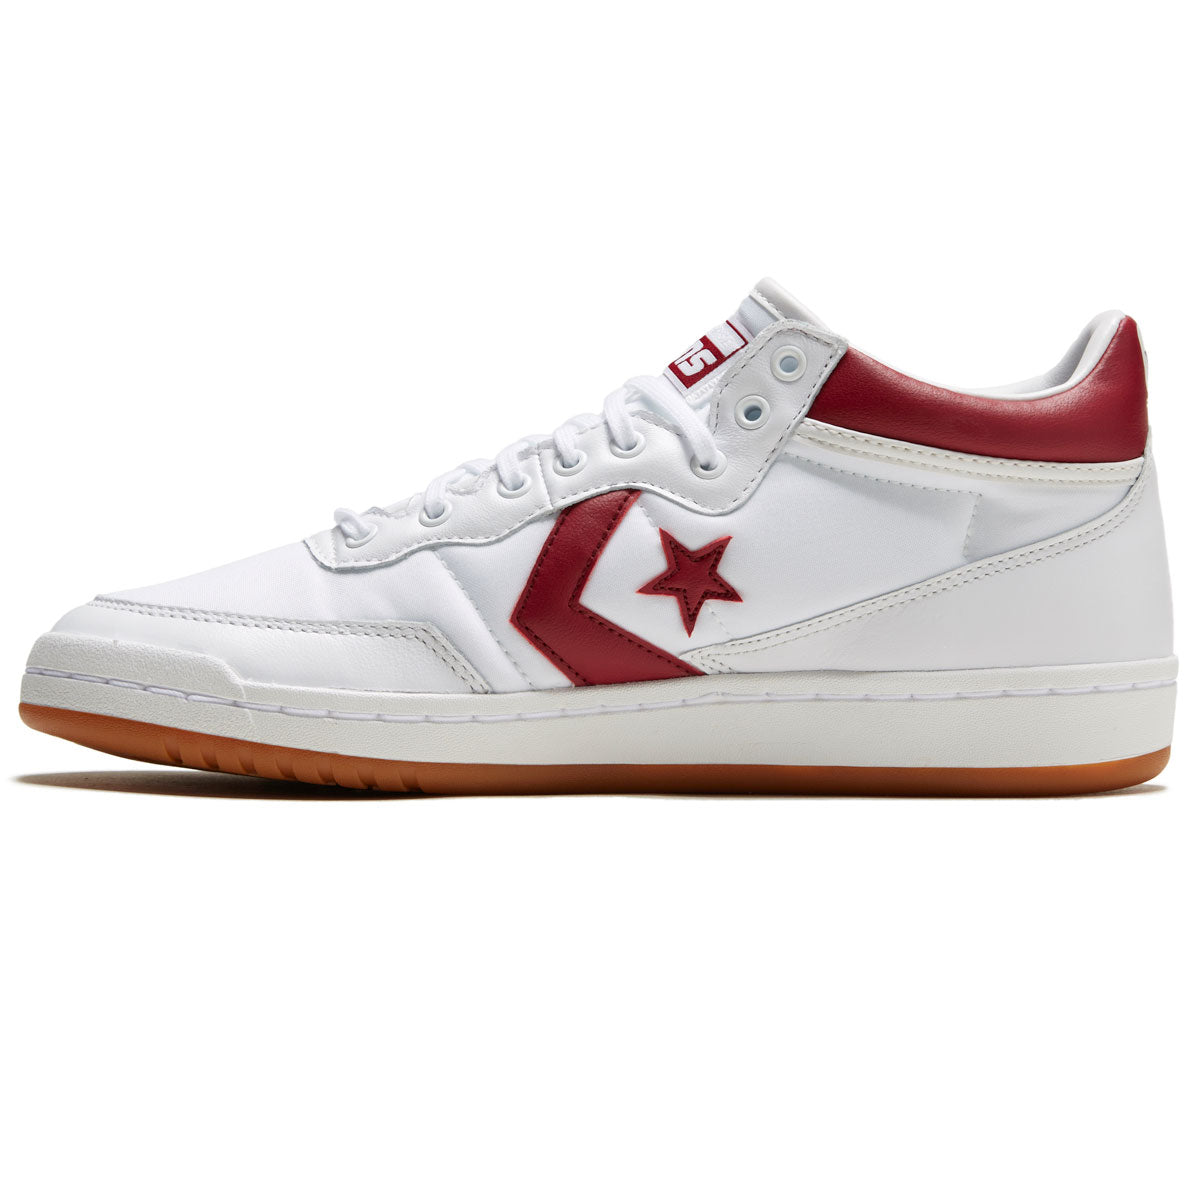 Converse Fastbreak Pro Mid Shoes - White/Team Red/White – CCS